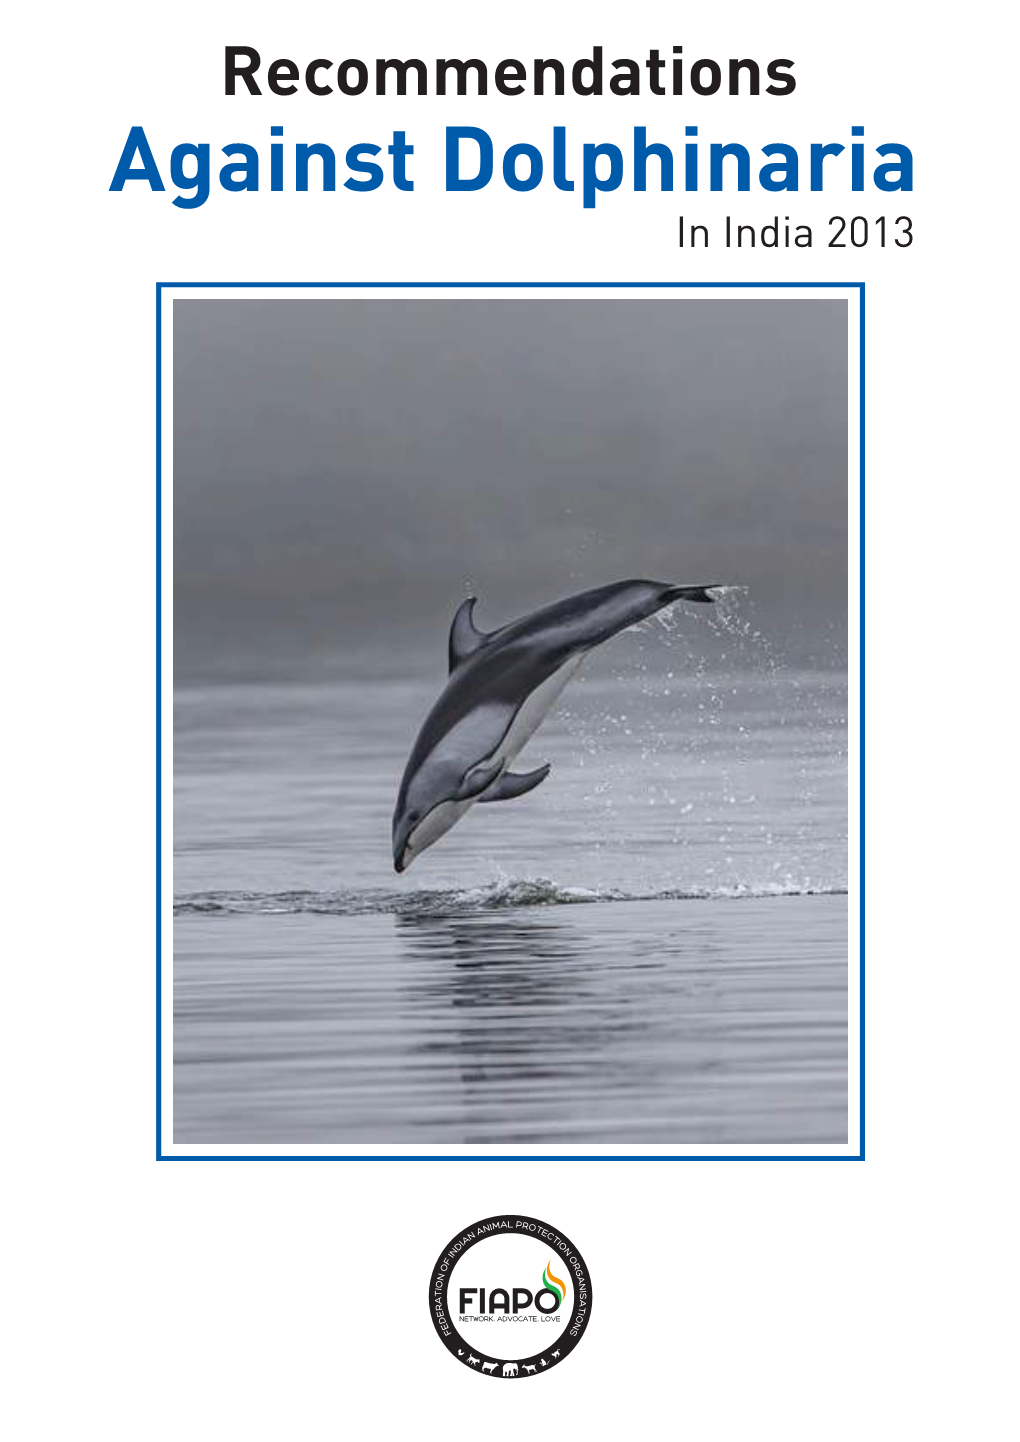 Recommendations Against Dolphinaria in India 2013.Cdr